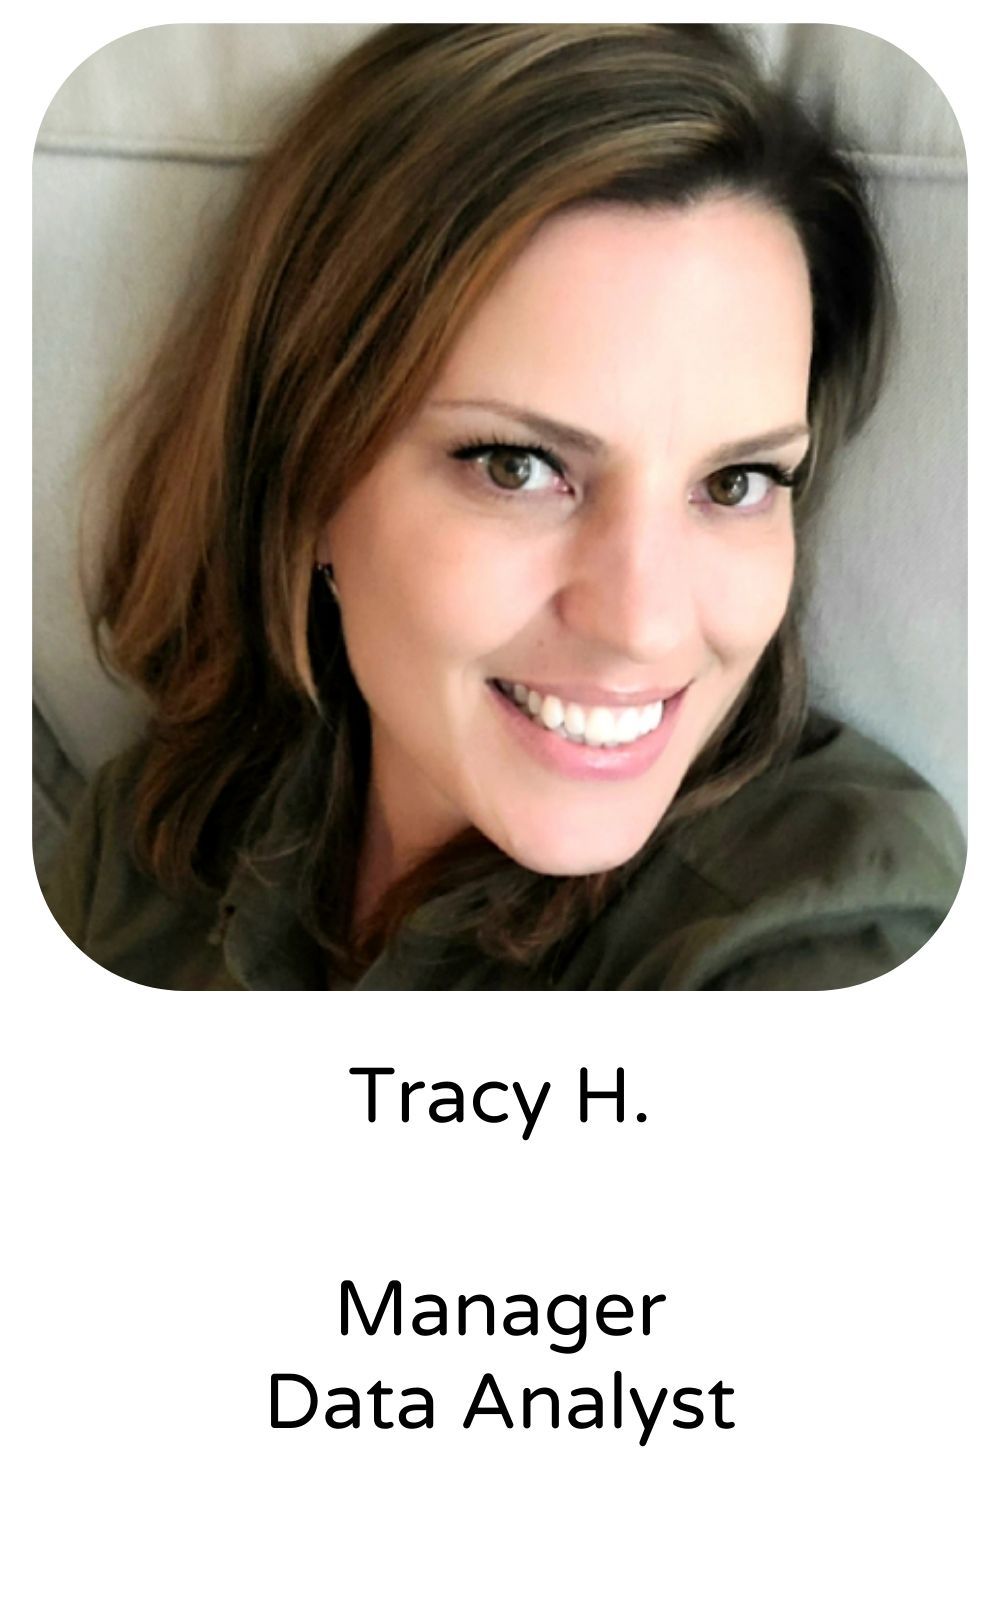 Tracy H, Manager, Data Analyst